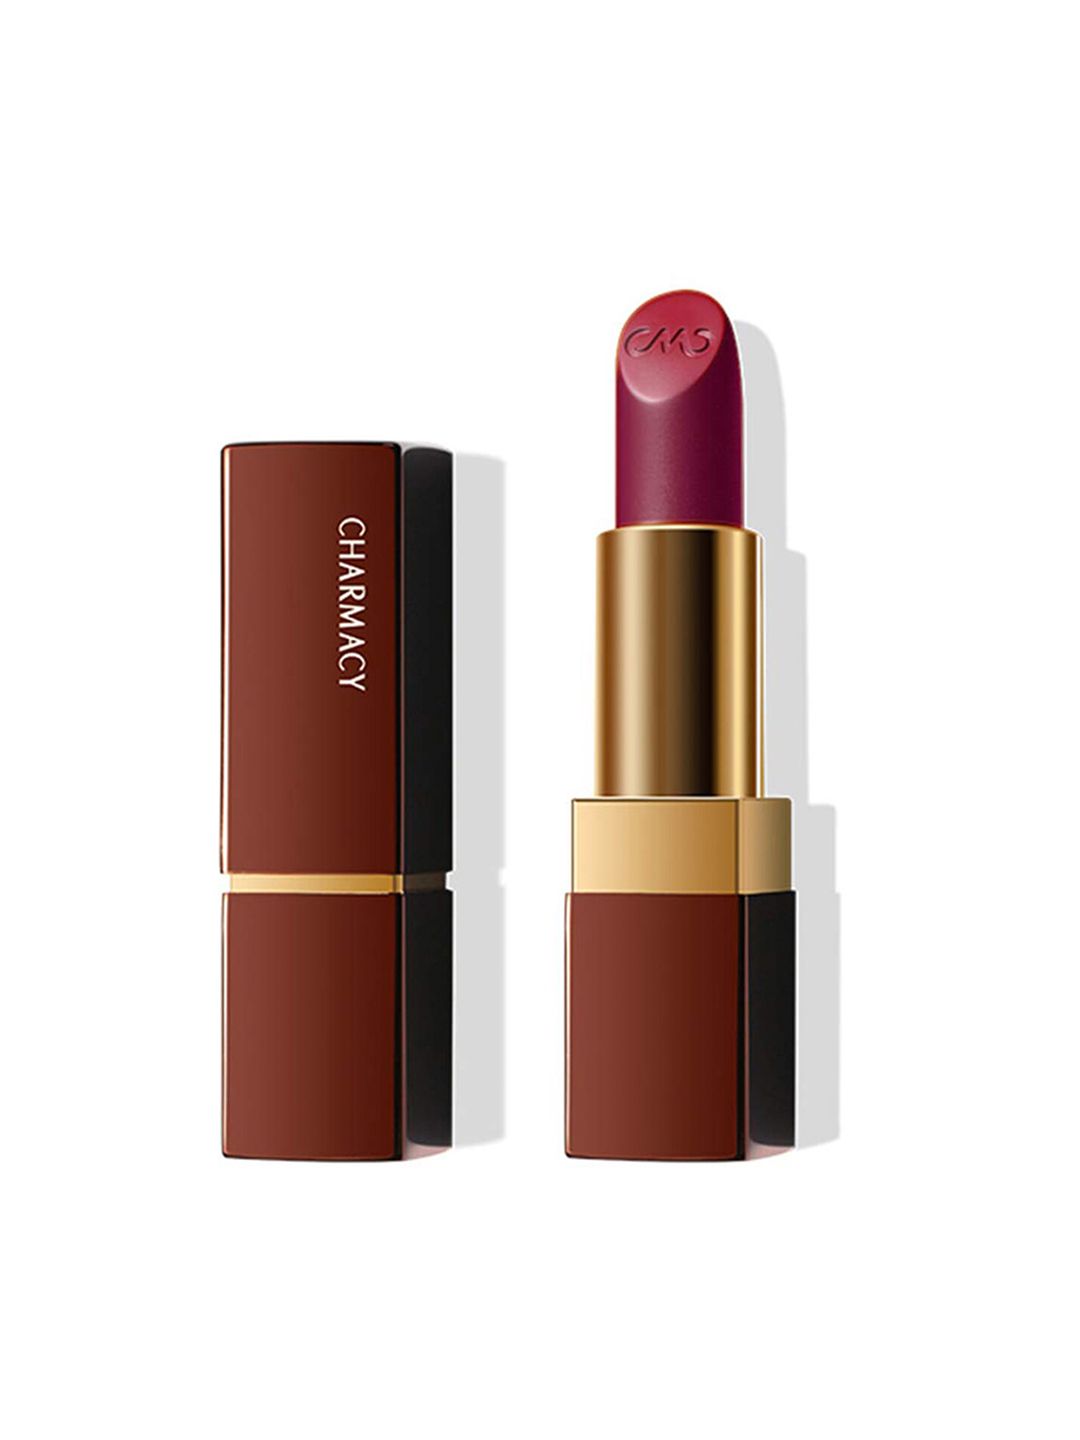 Charmacy Milano Soft Satin Matte Lipstick - Rusty Red 51 Price in India